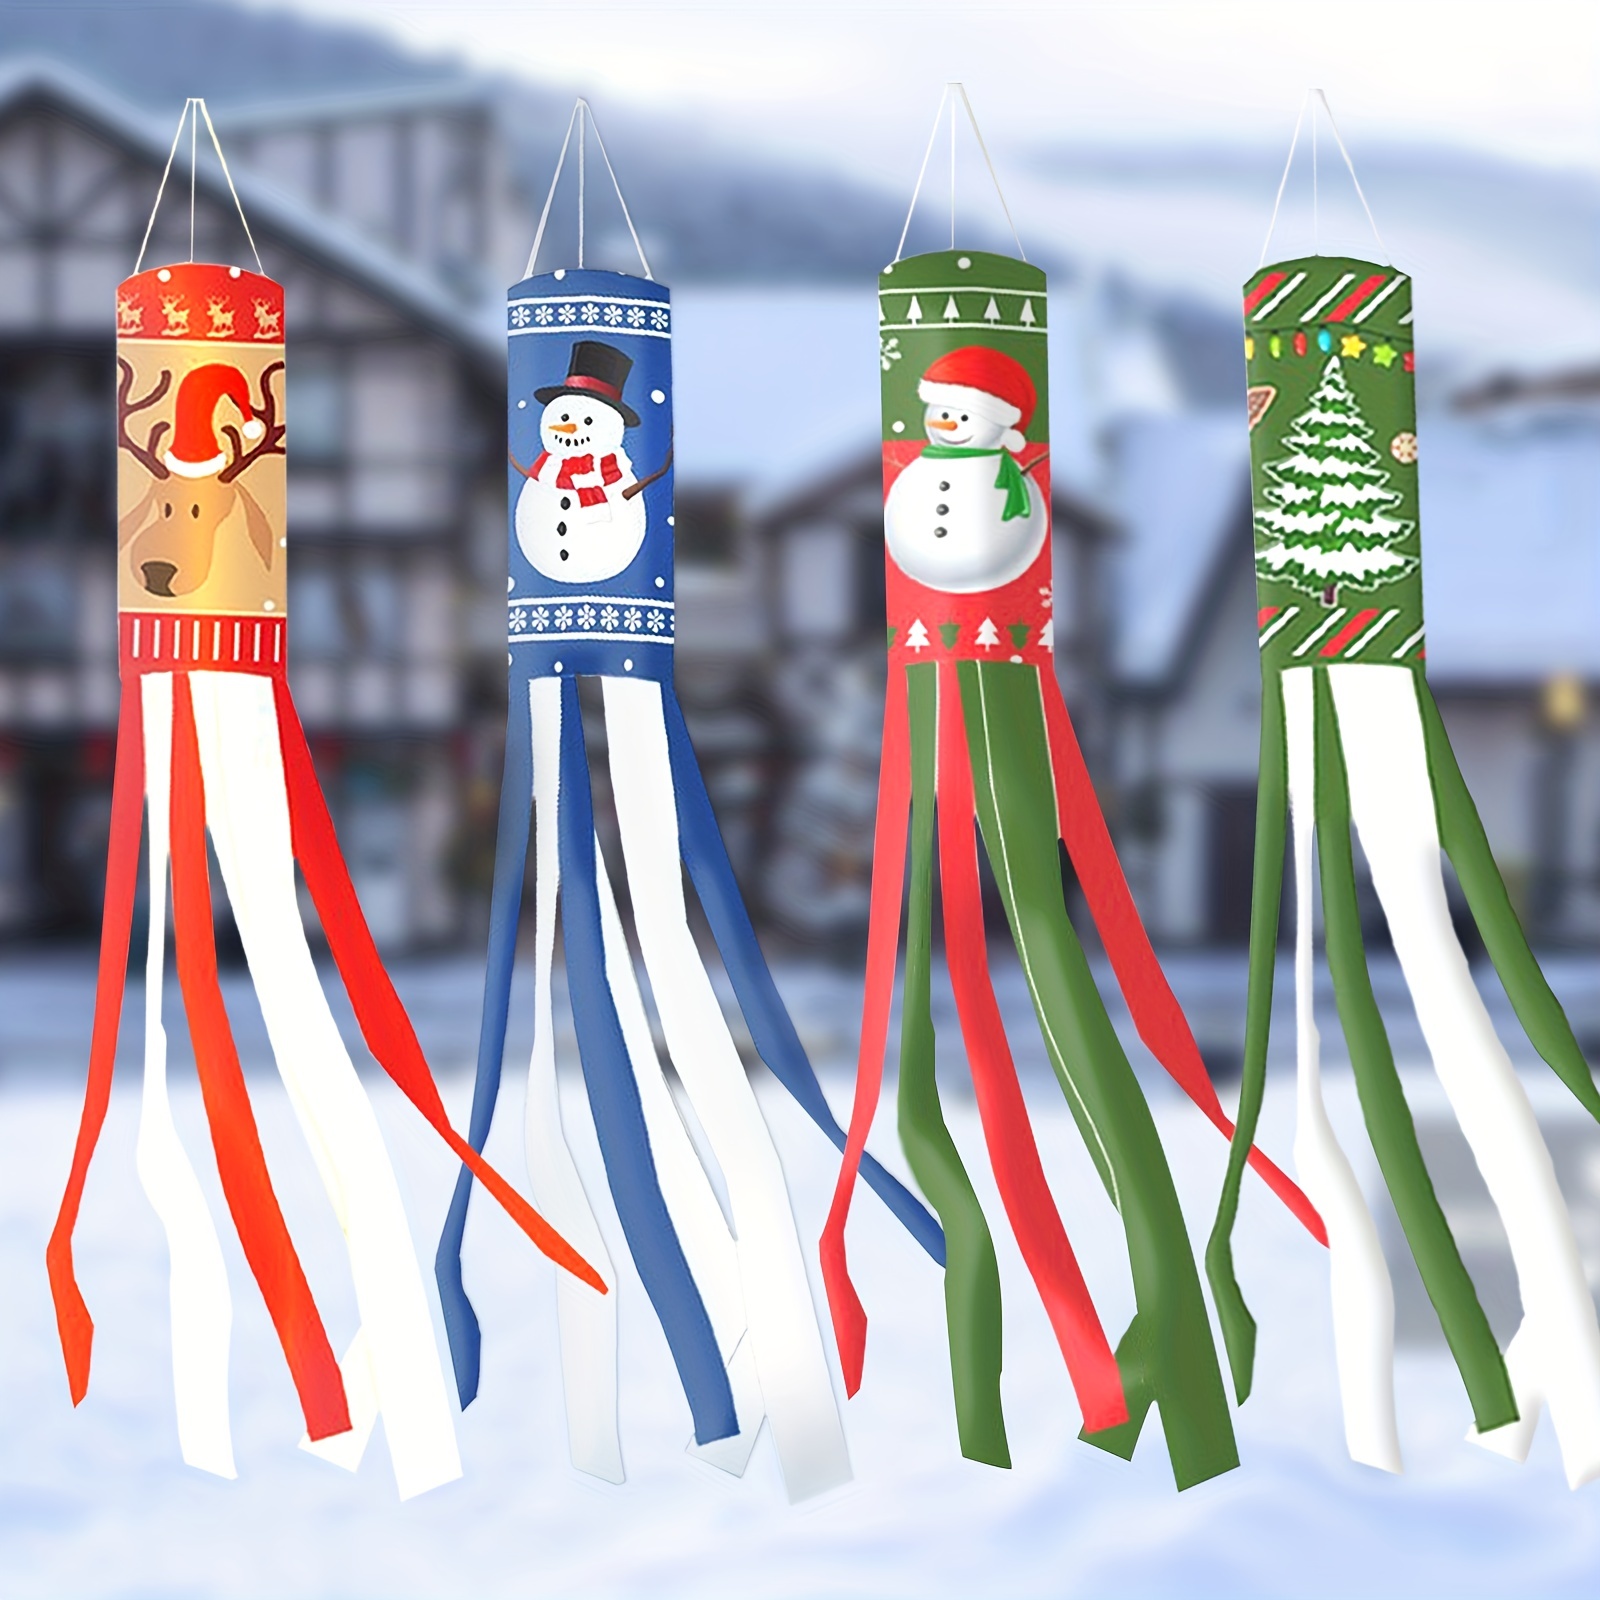 

1pc Christmas Windsock Flags Santa Claus Snowman Elk Windsock Winter Christmas Outdoor Hanging Decor For Yard Garden Patio Pathway Party Decor Outdoor Porch Hanging Wind Sock Christmas Party Supplies